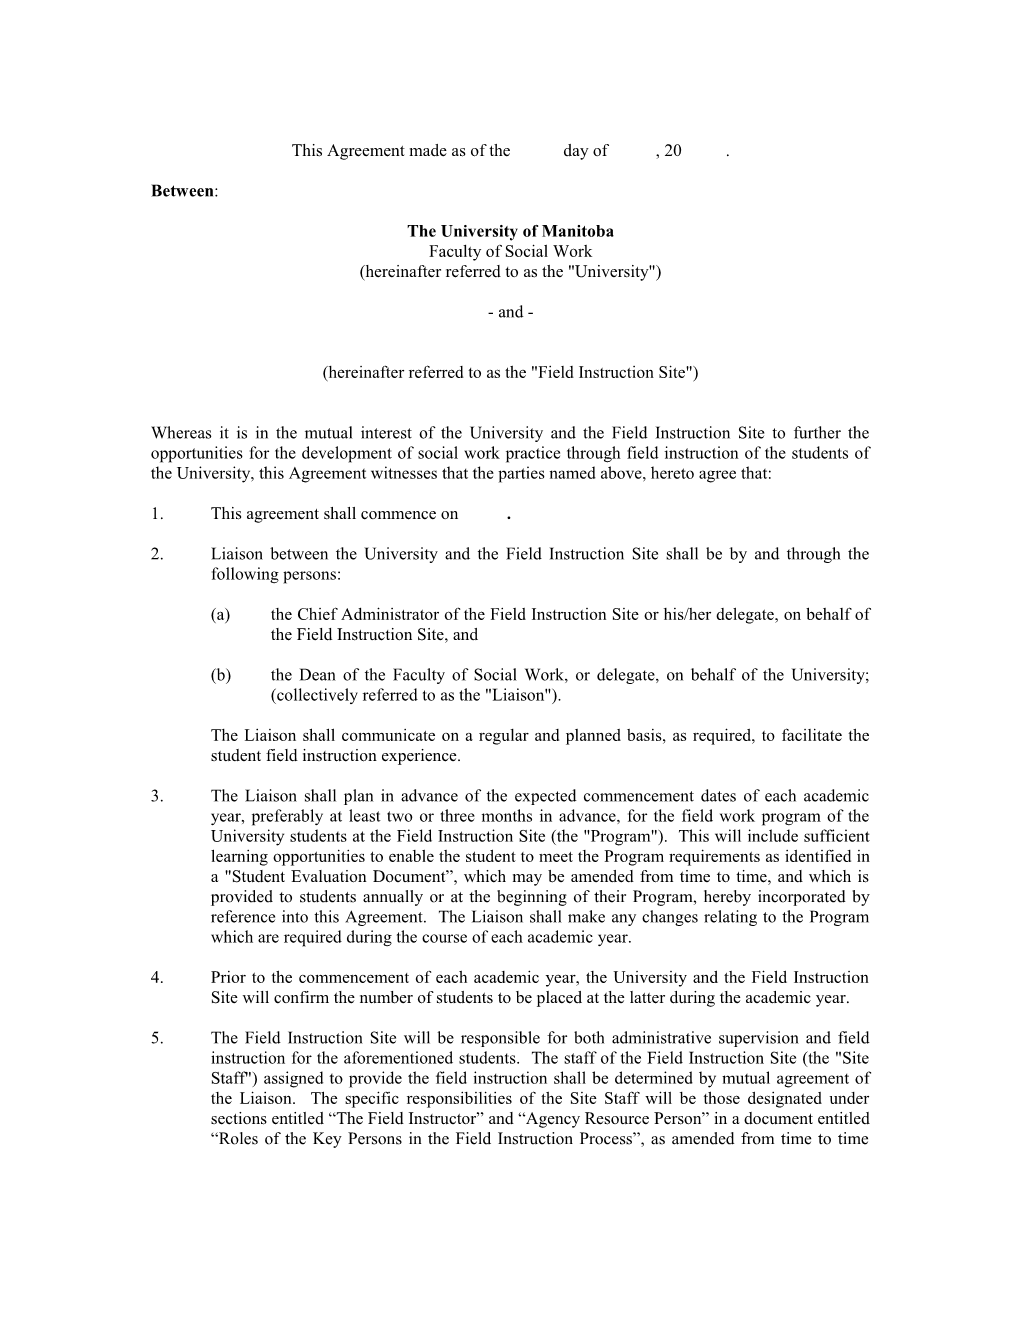 This Agreement Made in Triplicate As of the 7Th Day of September 2004